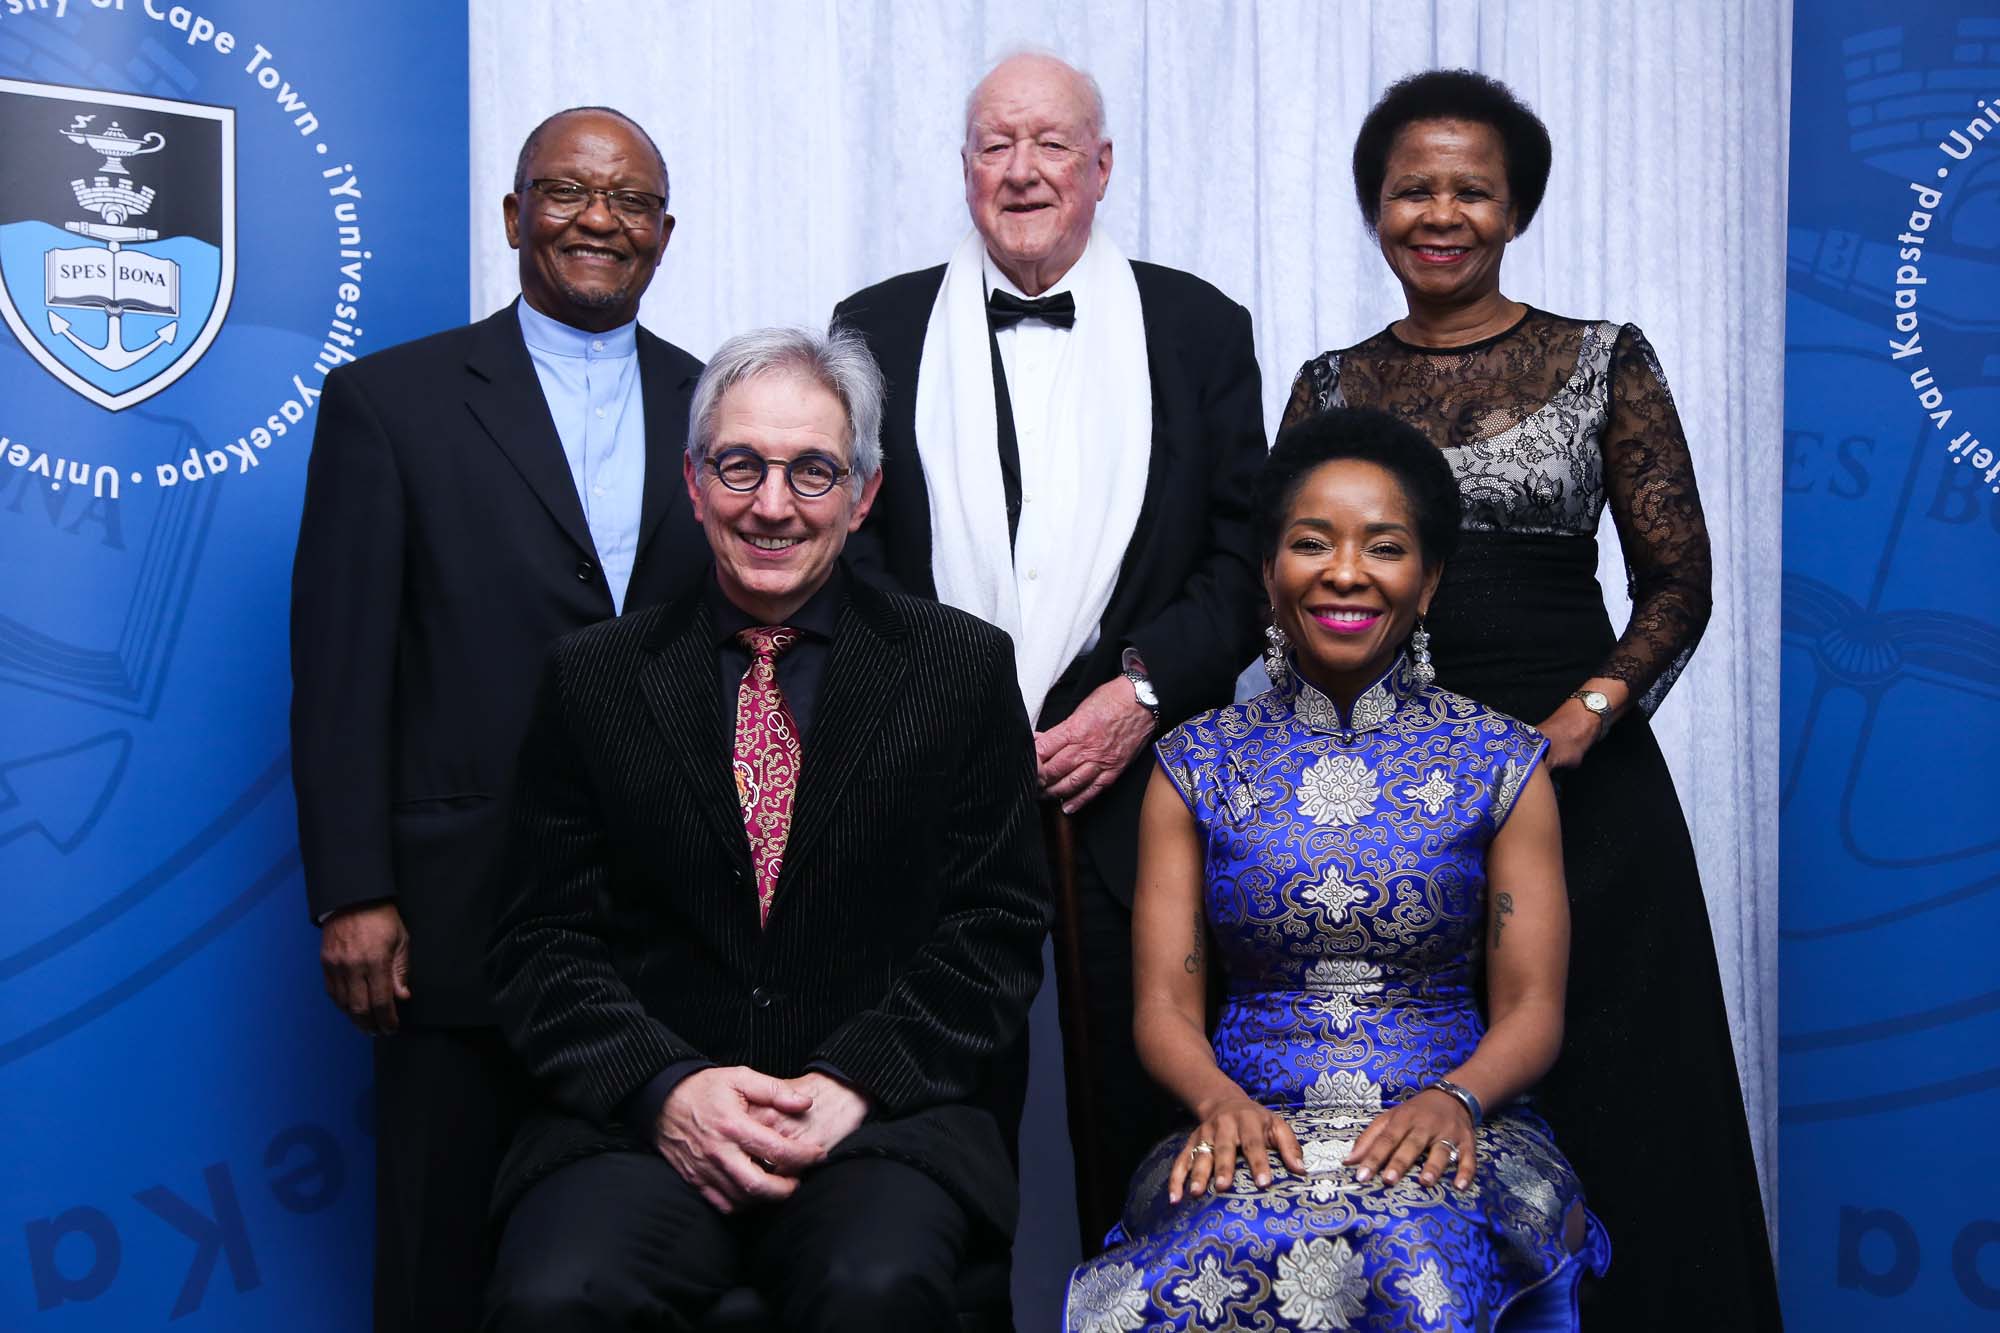 A farewell gala dinner at the V&A Waterfront for Dr Max Price saw five consecutive UCT vice-chancellors under the same roof: (from left) Prof Njabulo S Ndebele (2001–2008), Dr Max Price (2008–2018), Prof Stuart Saunders (1981–1996), Prof Mamokgethi Phakeng (2018–) and Dr Mamphela Ramphele (1997–2000).